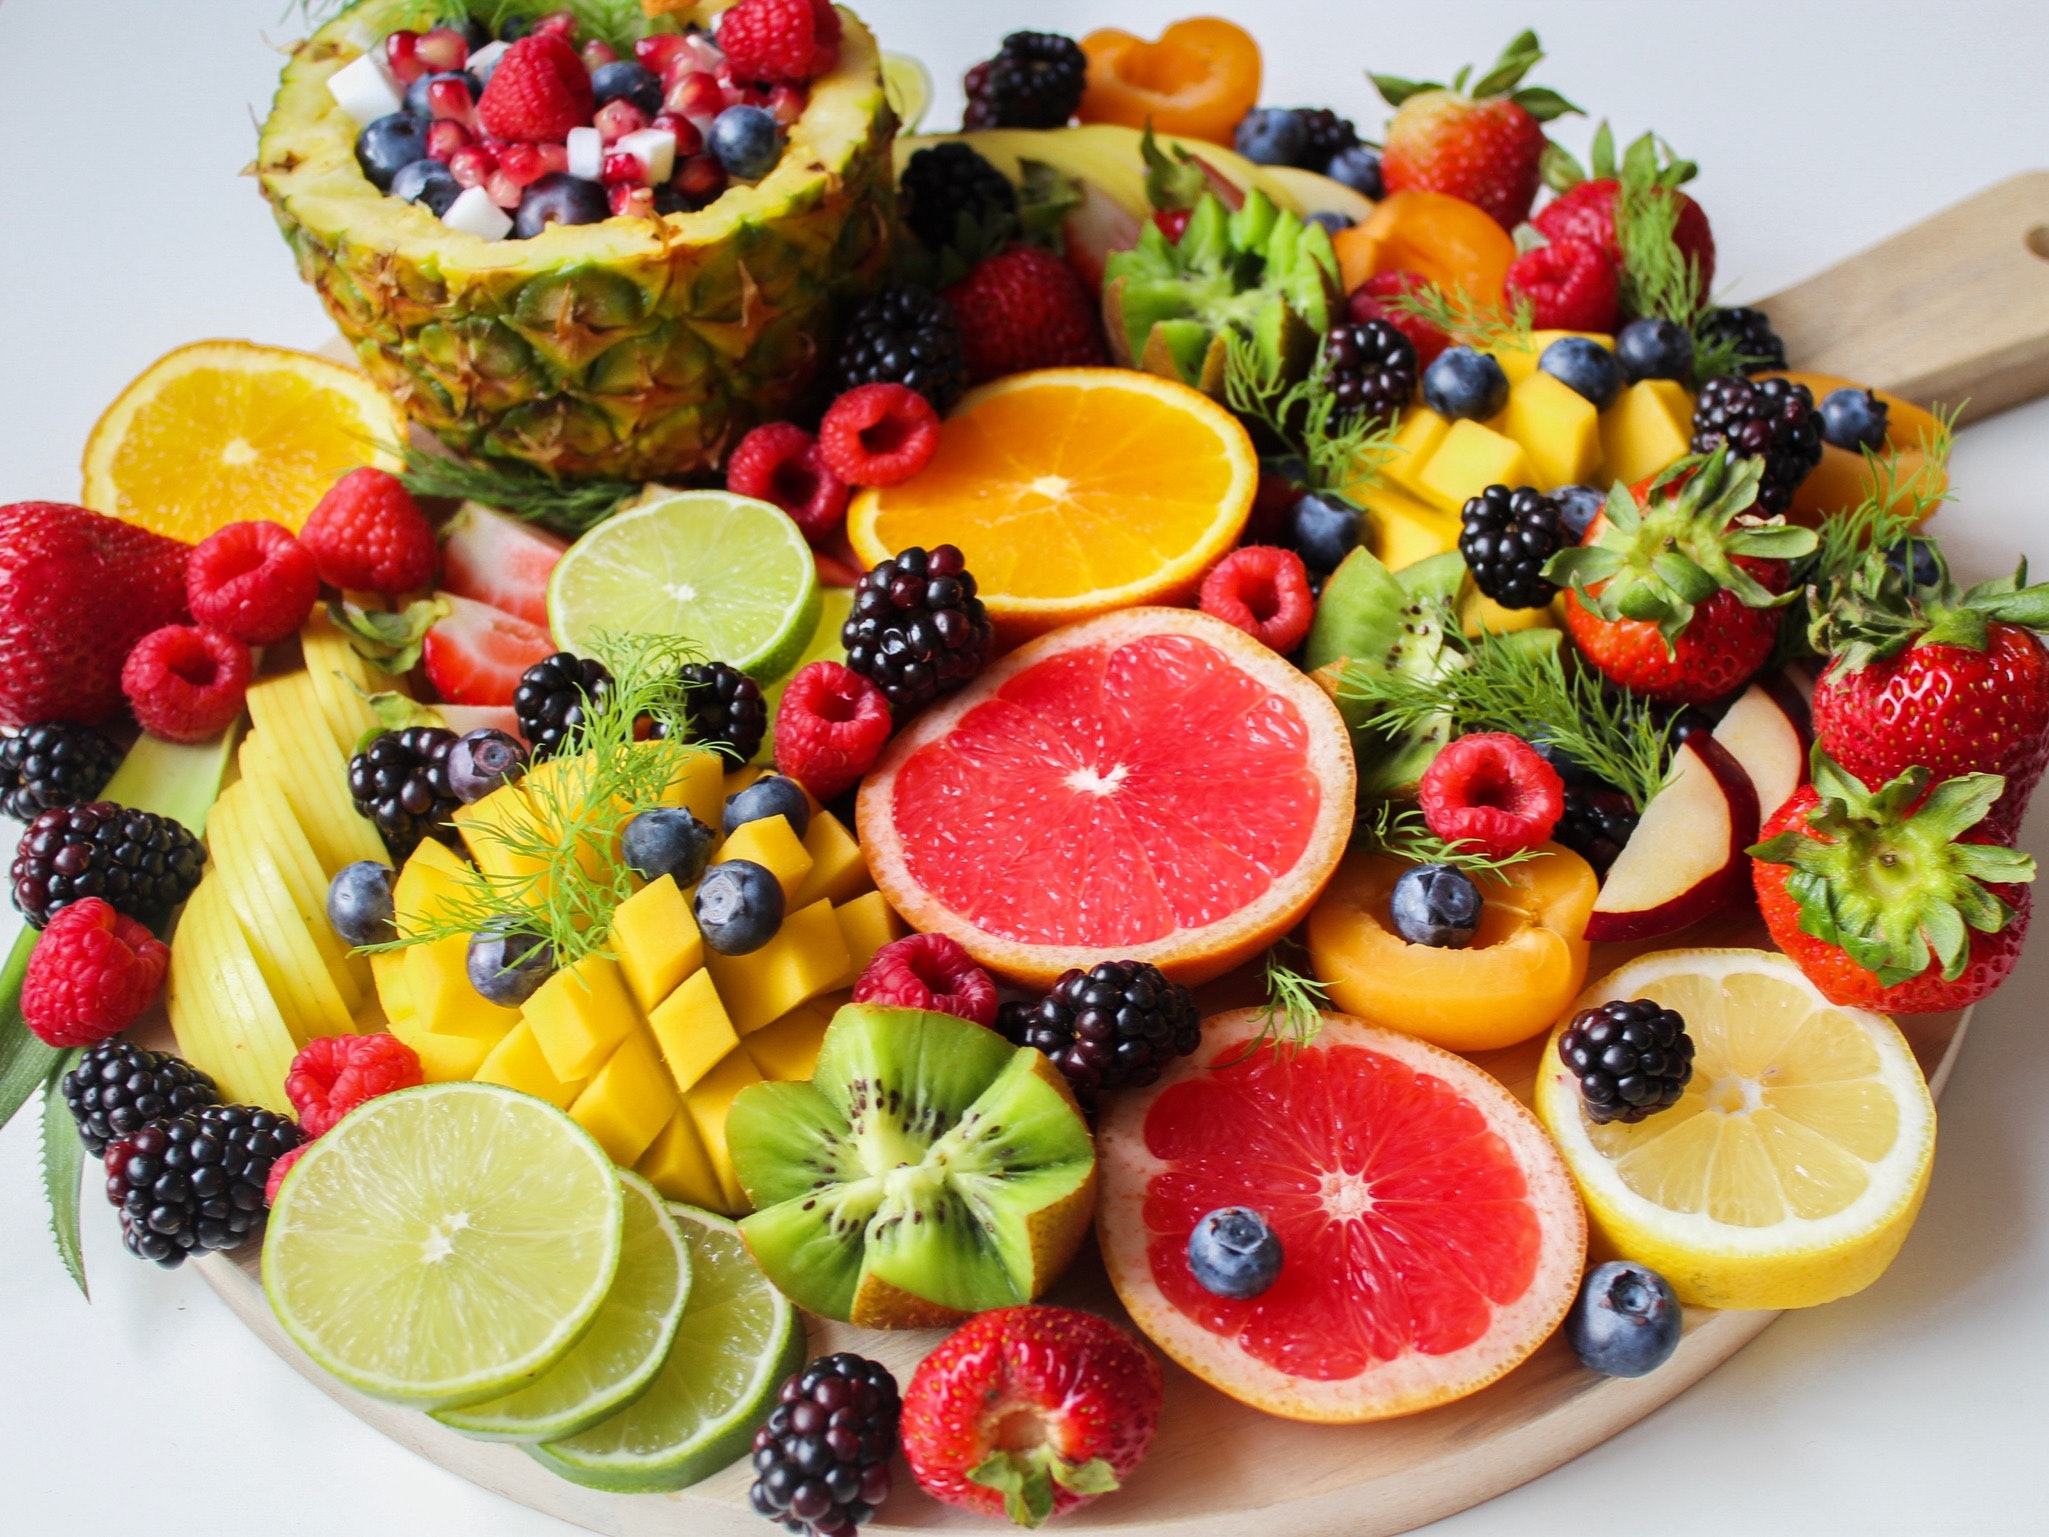 Sliced-Fruits-on-Tray